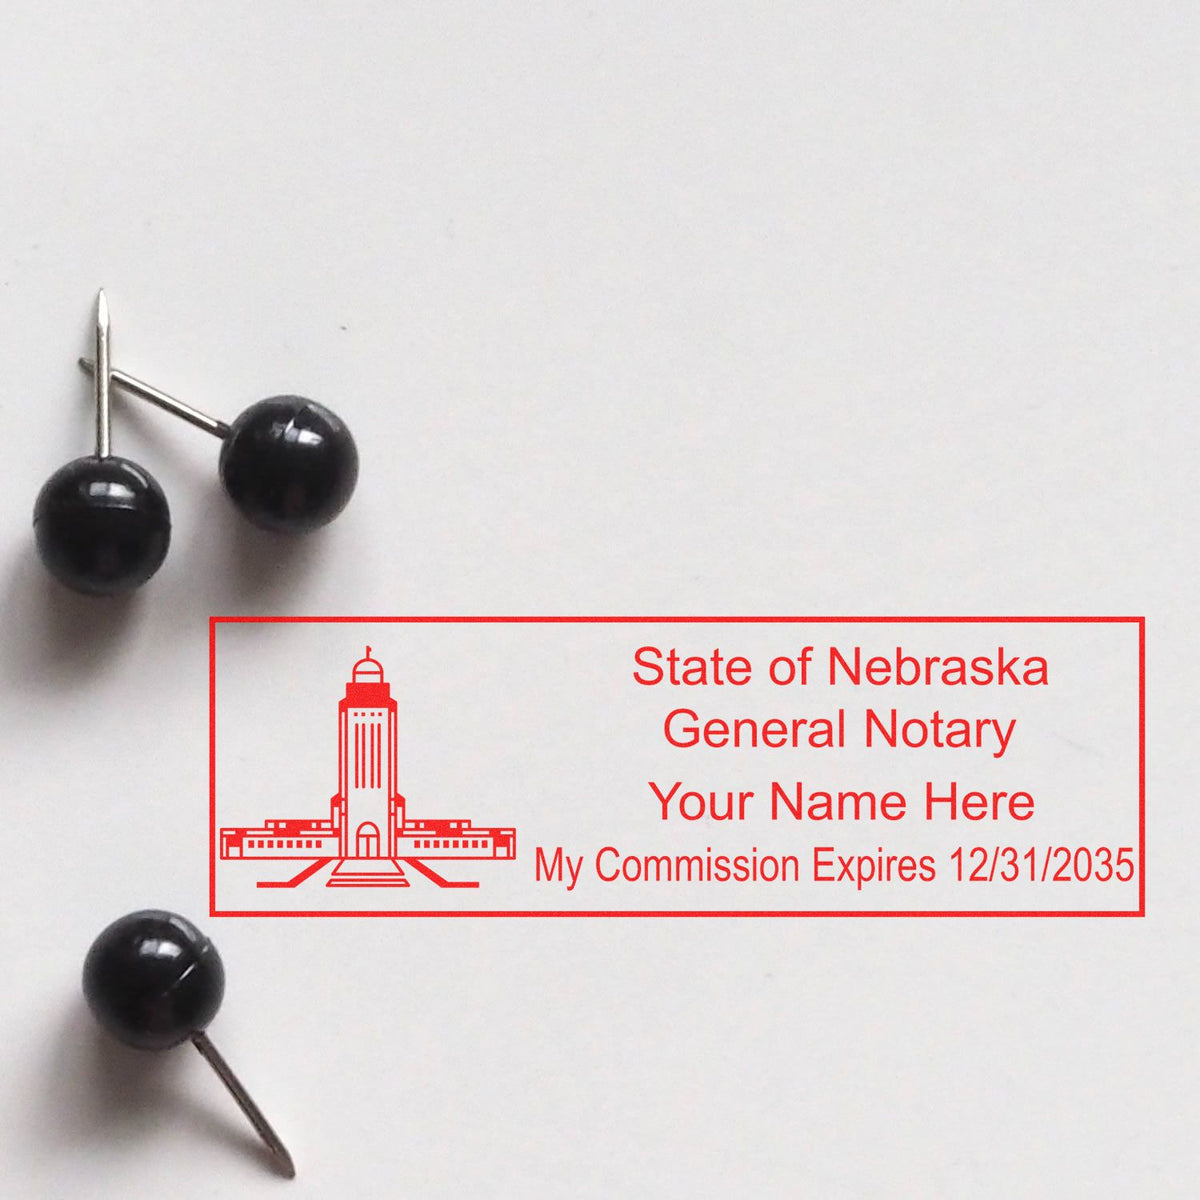 An alternative view of the Slim Pre-Inked State Seal Notary Stamp for Nebraska stamped on a sheet of paper showing the image in use